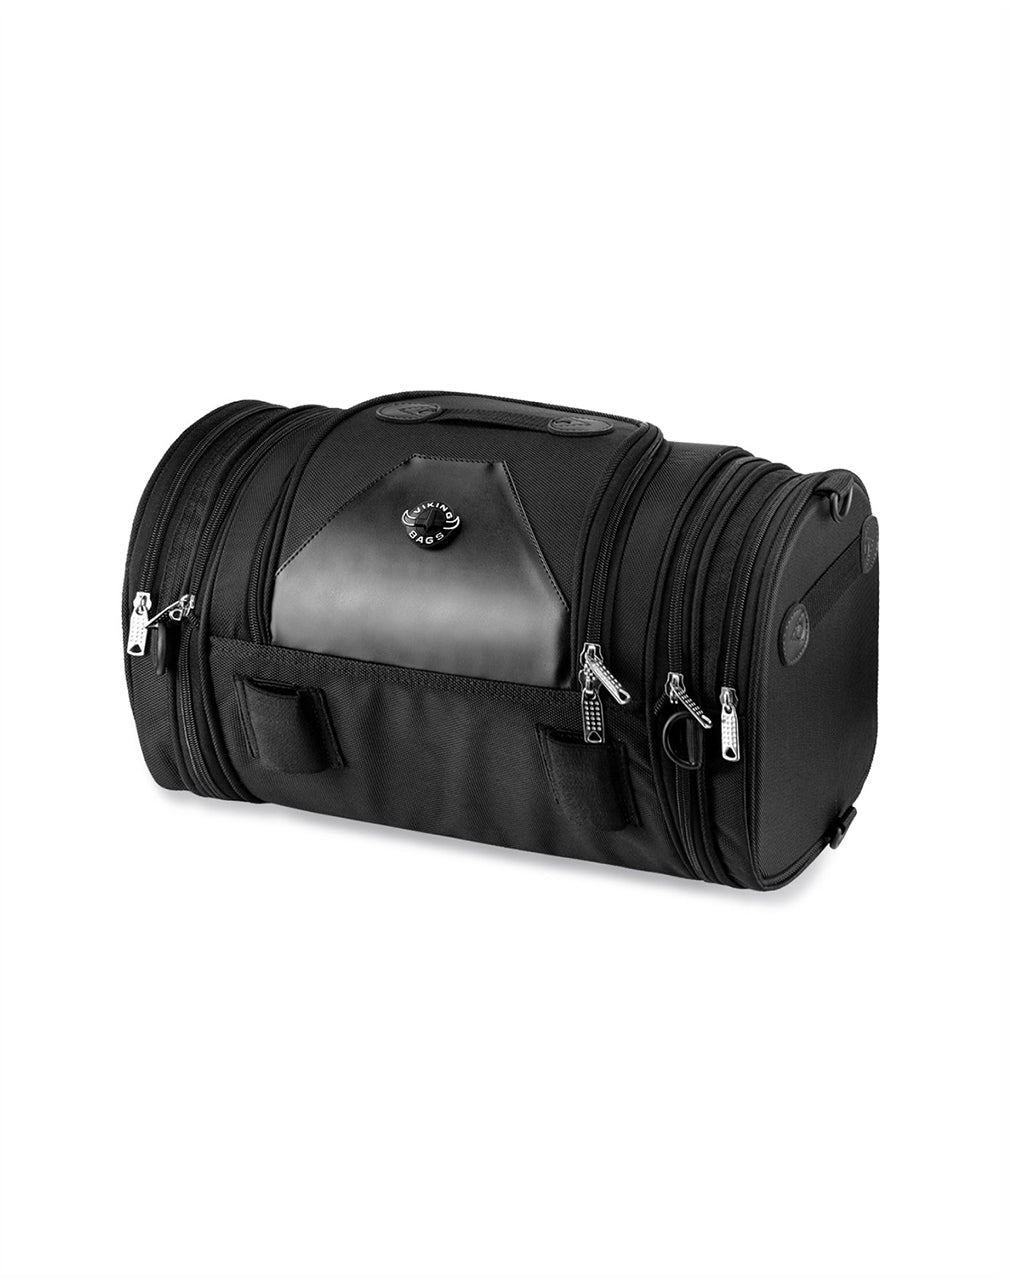 11L - Axwell Small Triumph Motorcycle Tail Bag